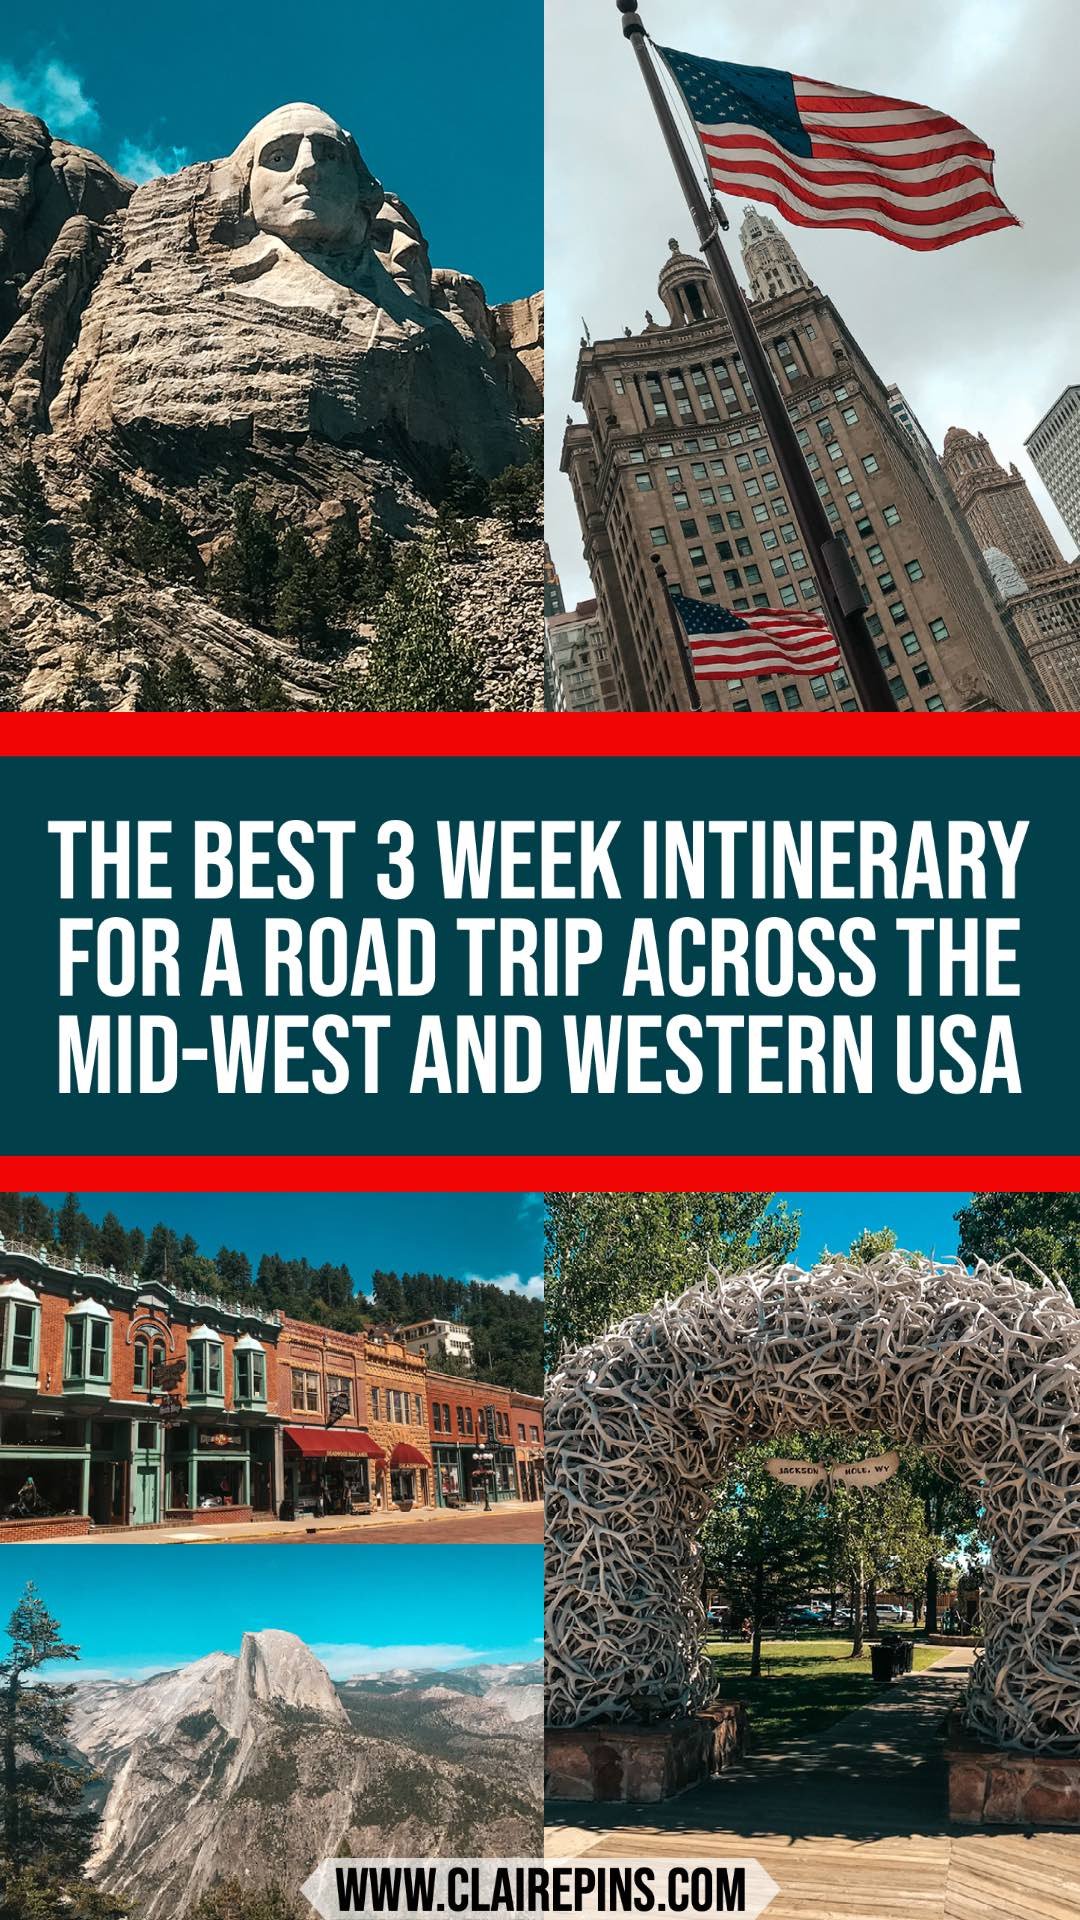 How To Plan The Best American Roadtrip In 3 Weeks Across The Midwest